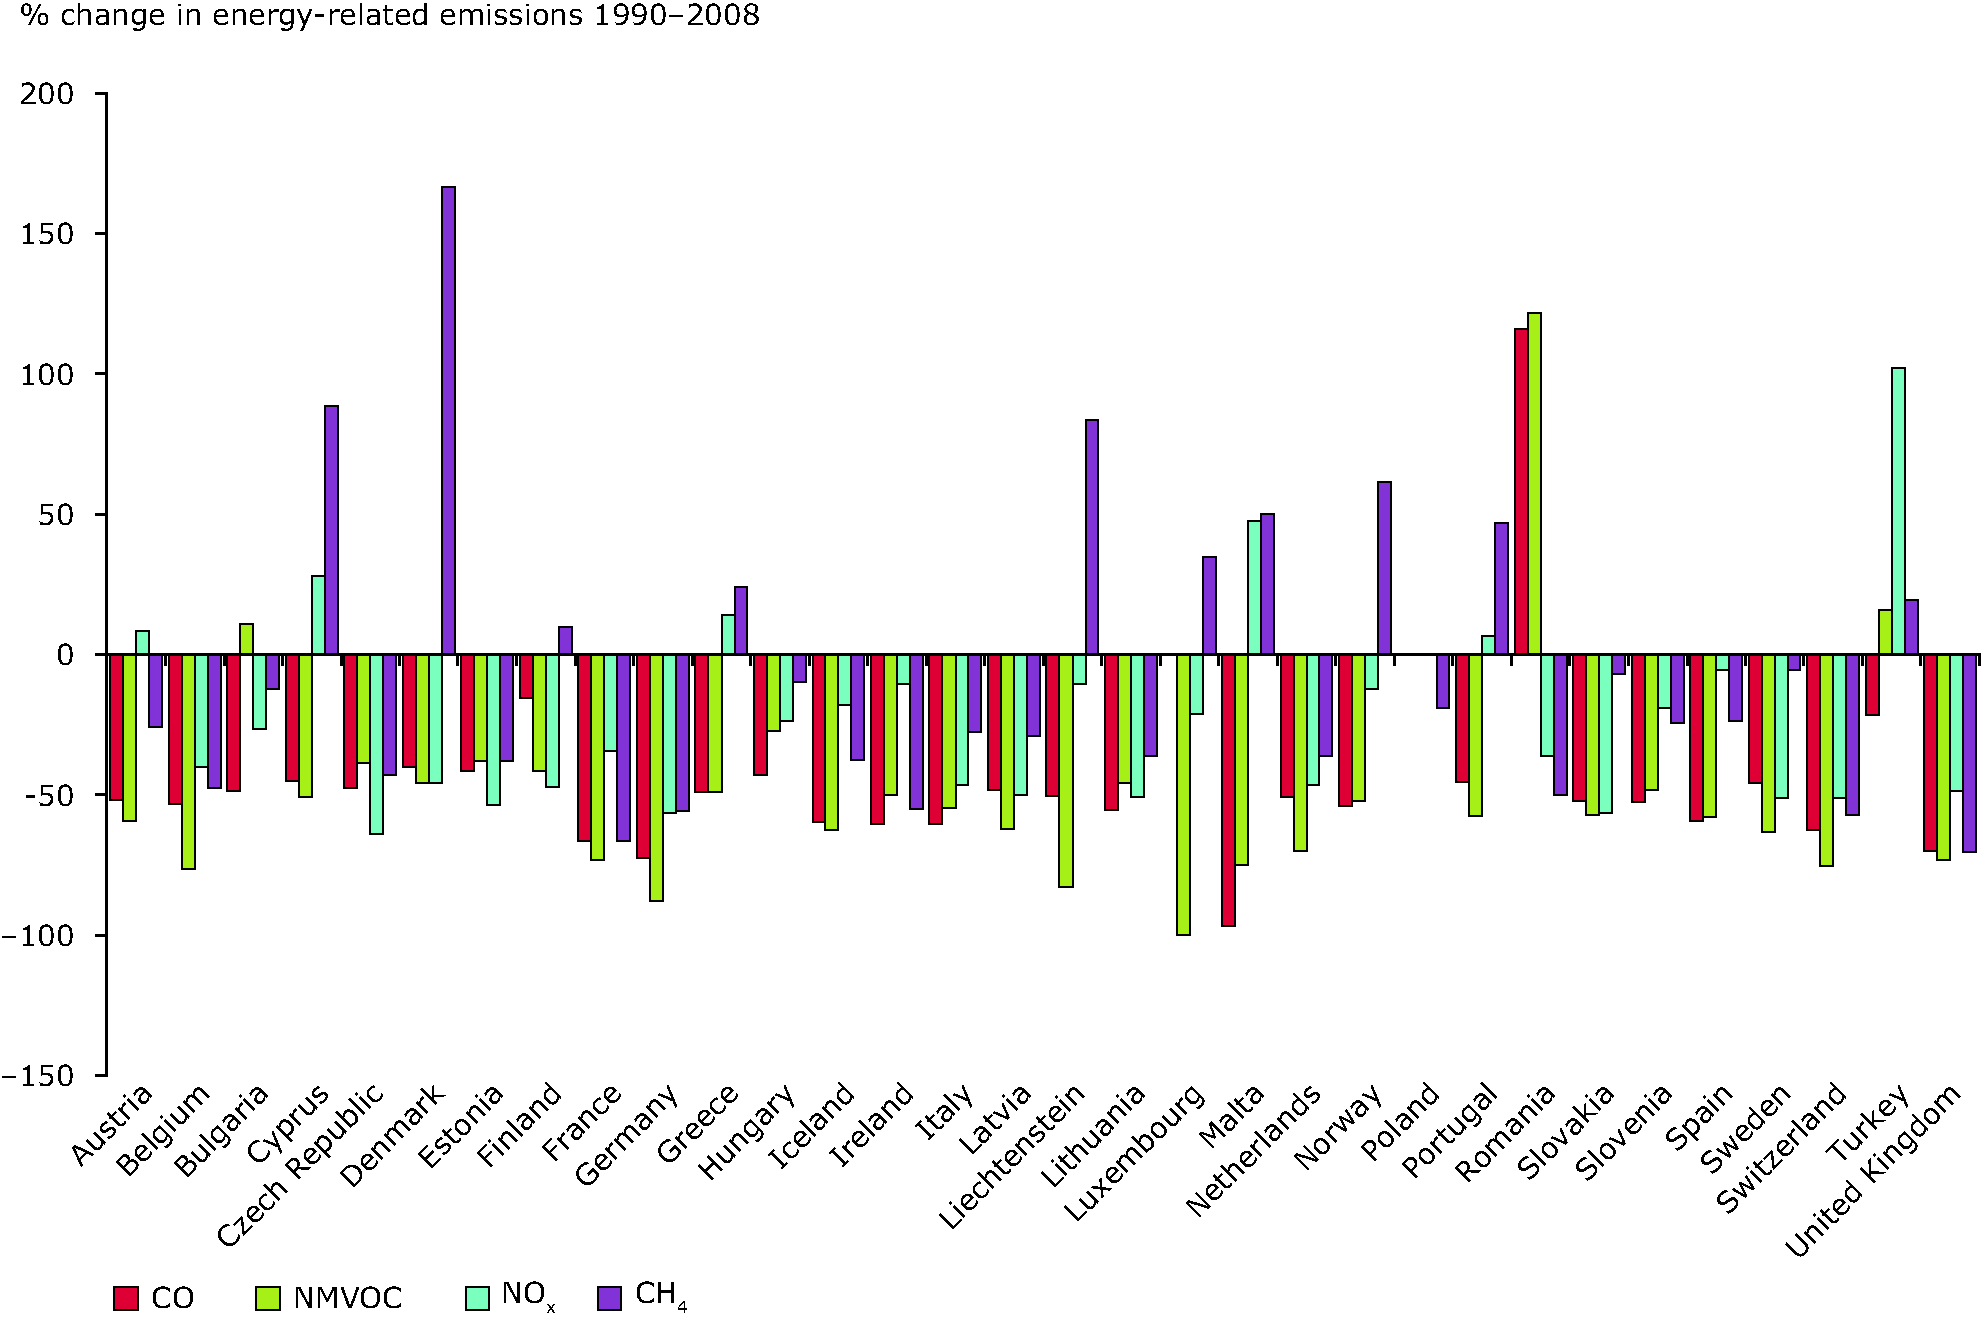 Change in energy-related emissions of ozone precursors by country, 1990-2008